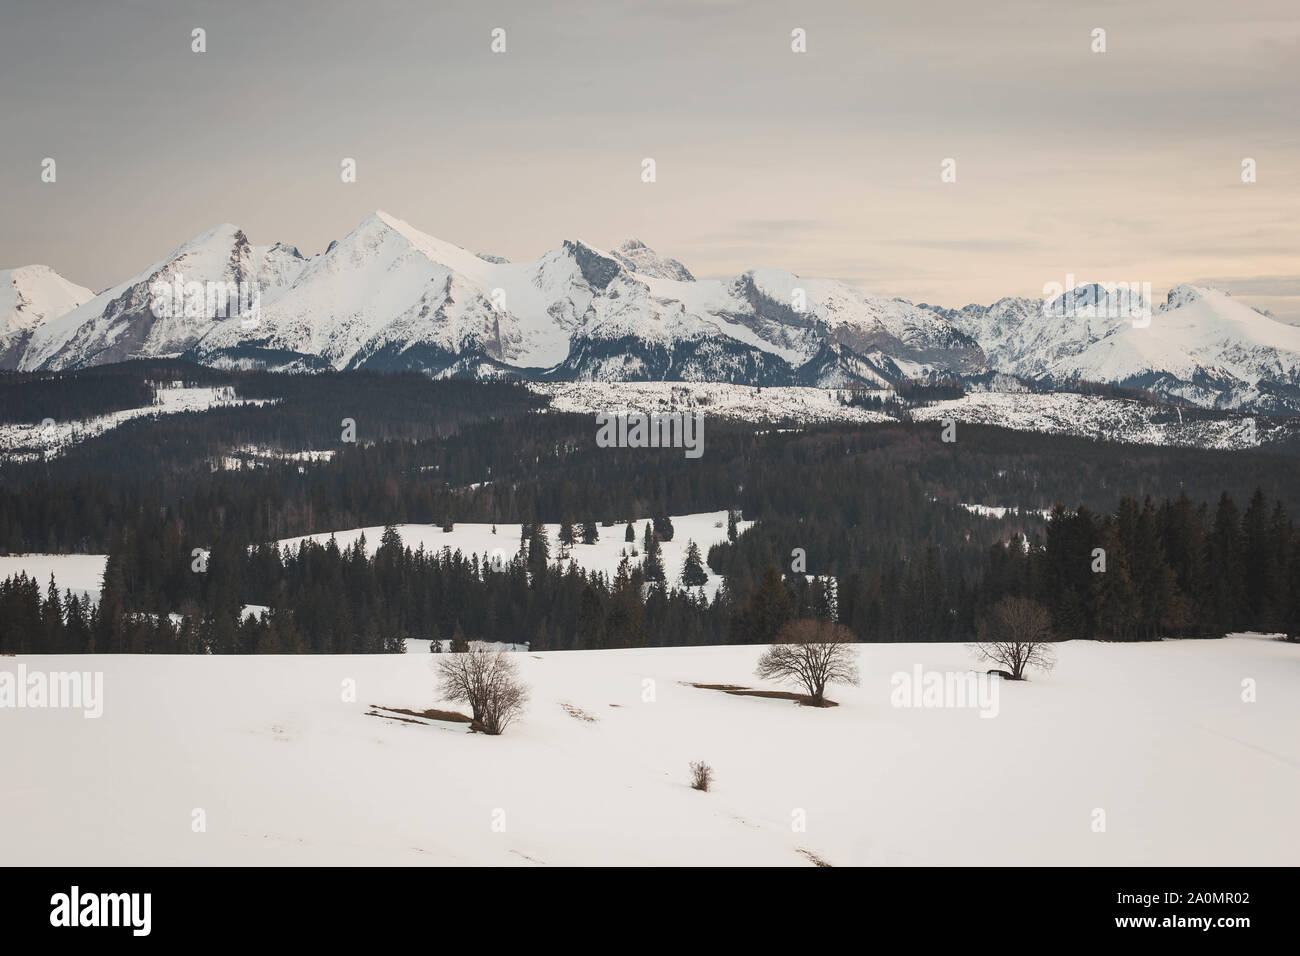 View from Lapszanka on sunset above tatra moutains in winter scenery. Stock Photo